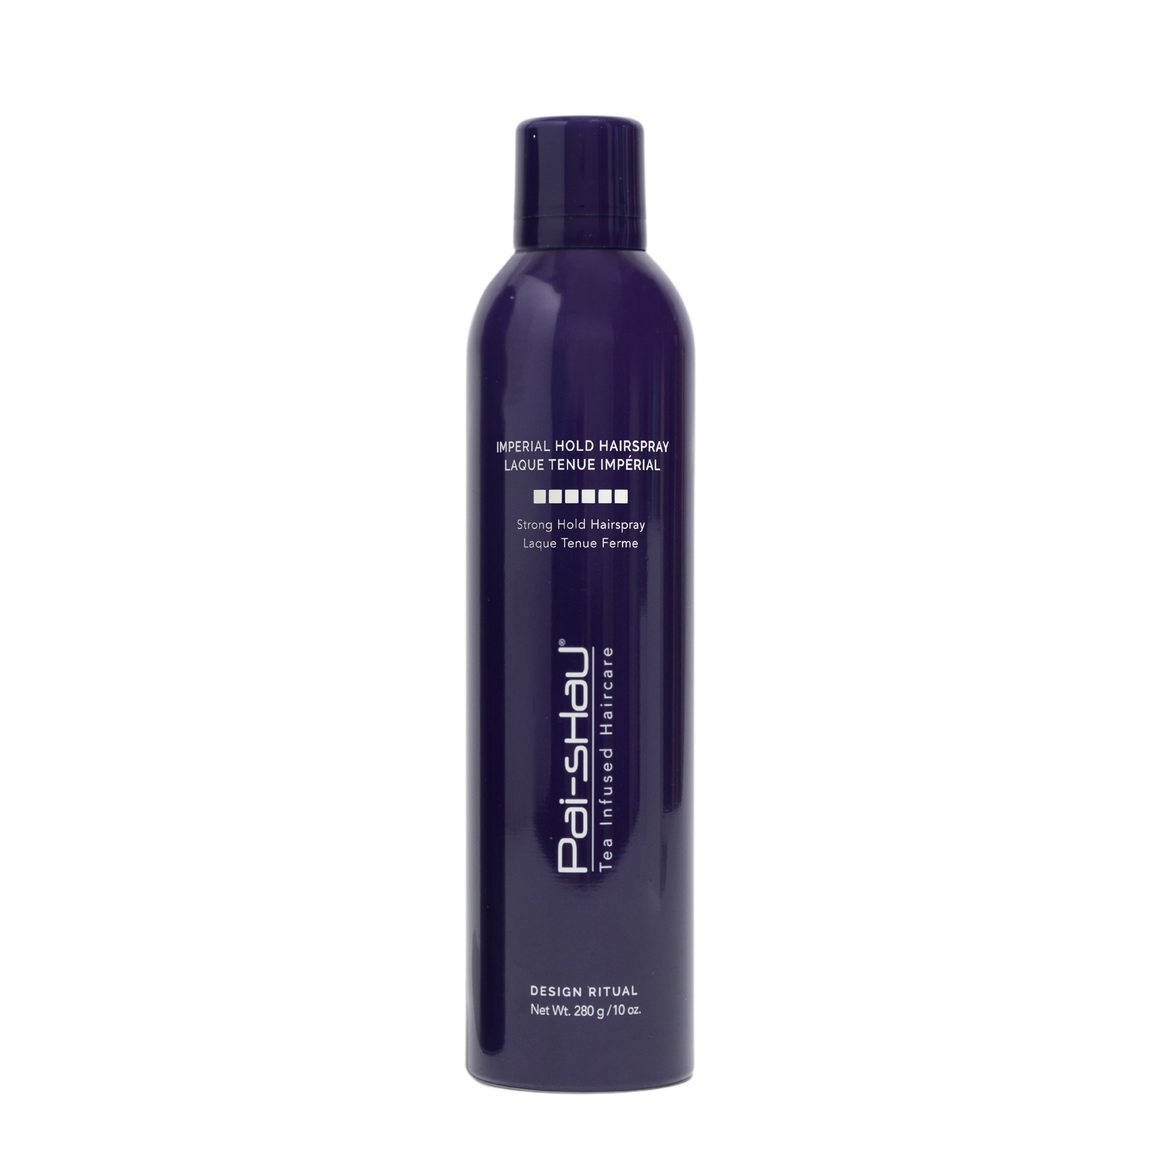 Pai-Shau - Imperial Hold Hairspray | 10 OZ| - by Pai-Shau |ProCare Outlet|